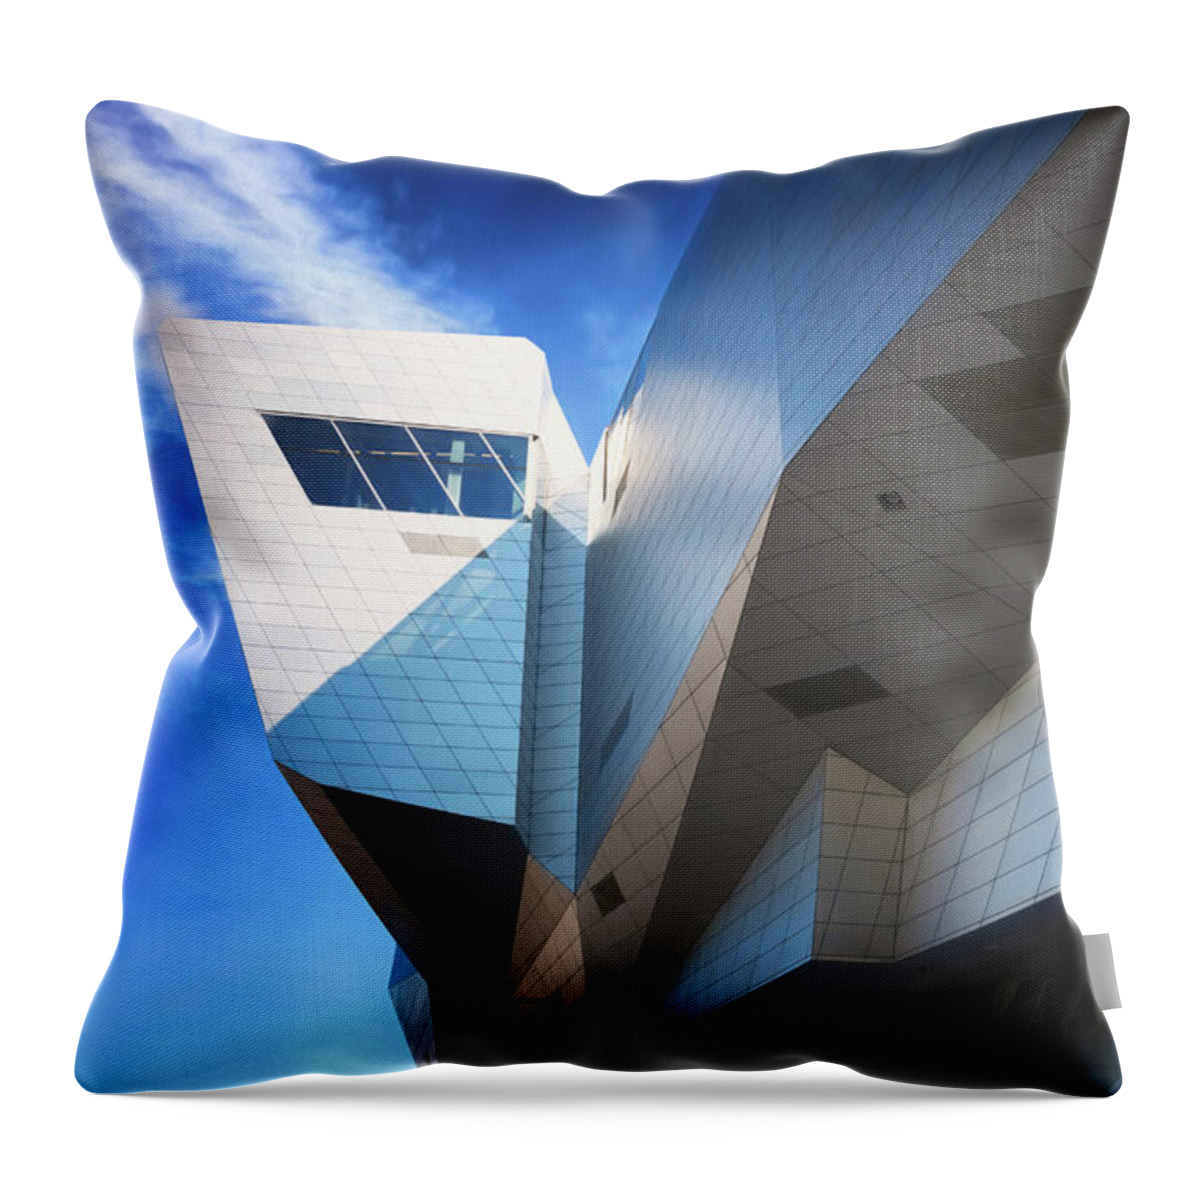 Lyon Throw Pillow featuring the photograph Modern Architecture Lyon France by Carol Japp